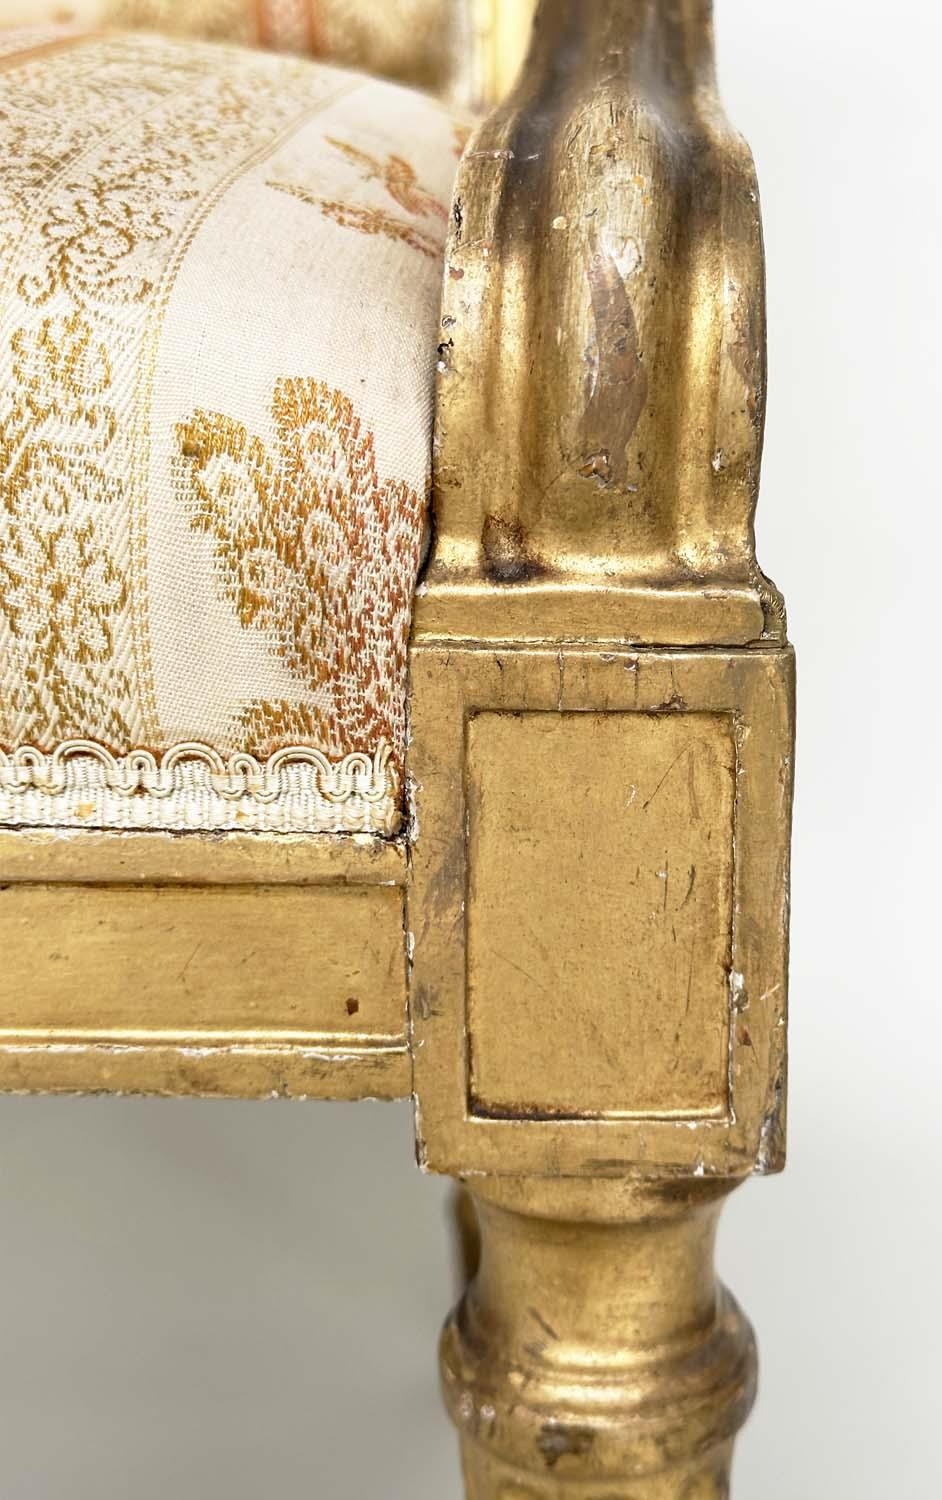 FAUTEUILS, a pair, 19th century giltwood each with down swept arms and carved fluted supports, - Image 5 of 11